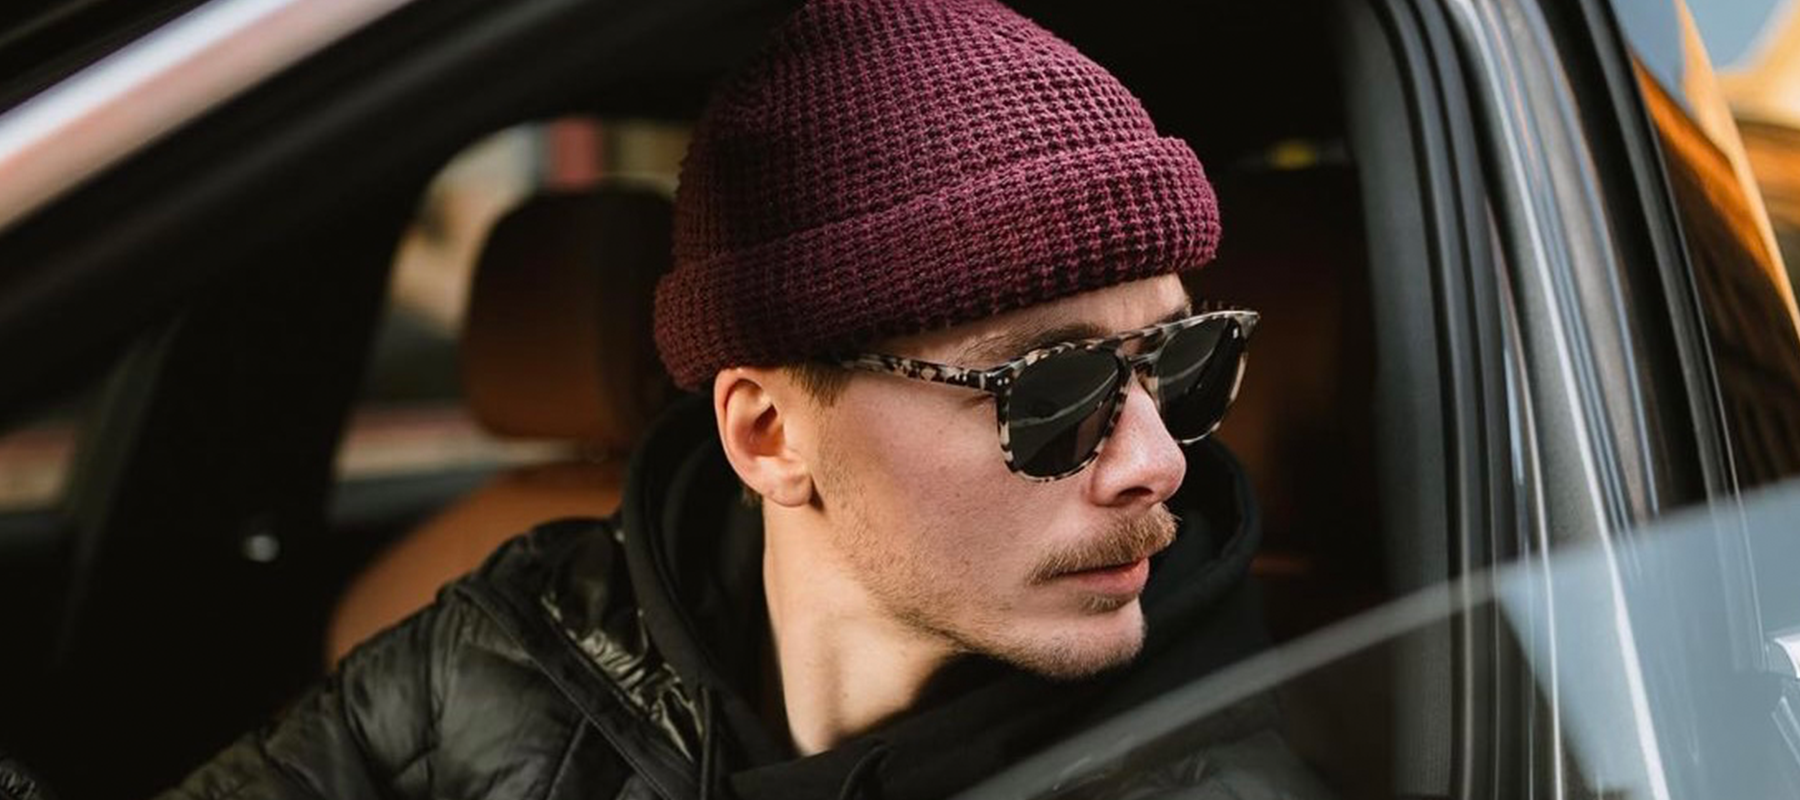 Best Sunglasses For Driving